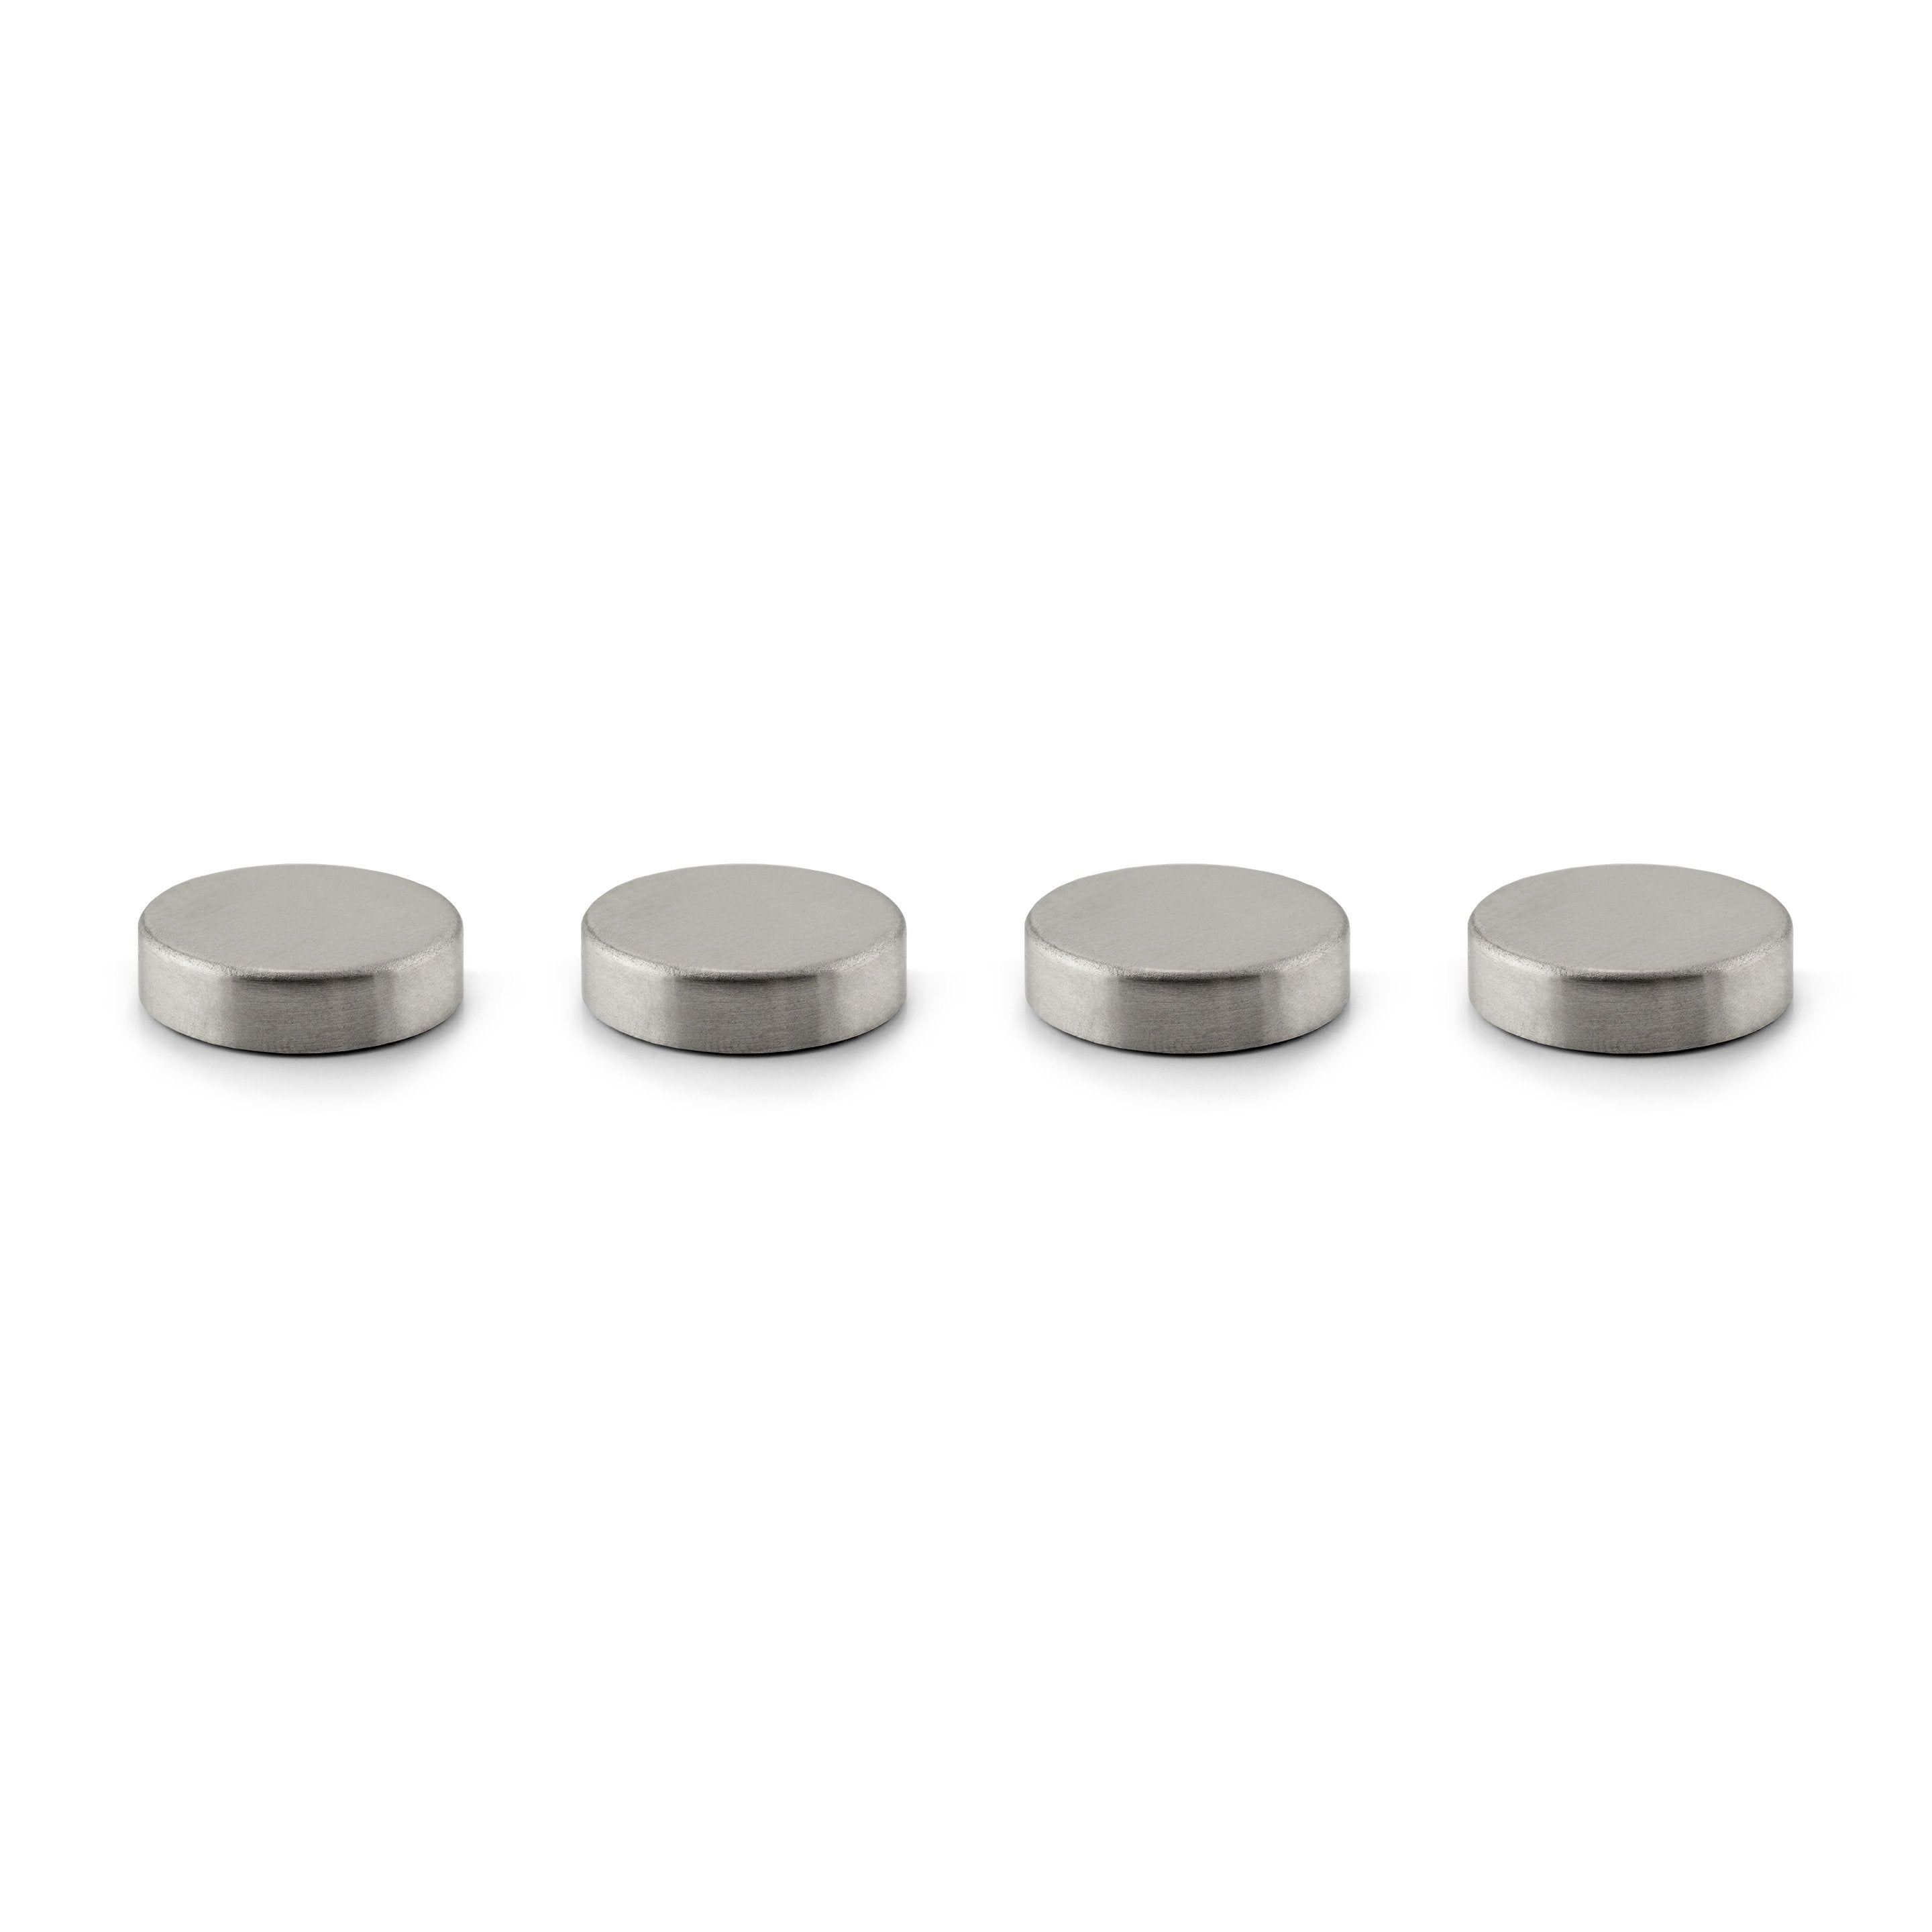 ThreeByThree Seattle Small Snap! Strong Magnets Stainless Steel Pkg/4